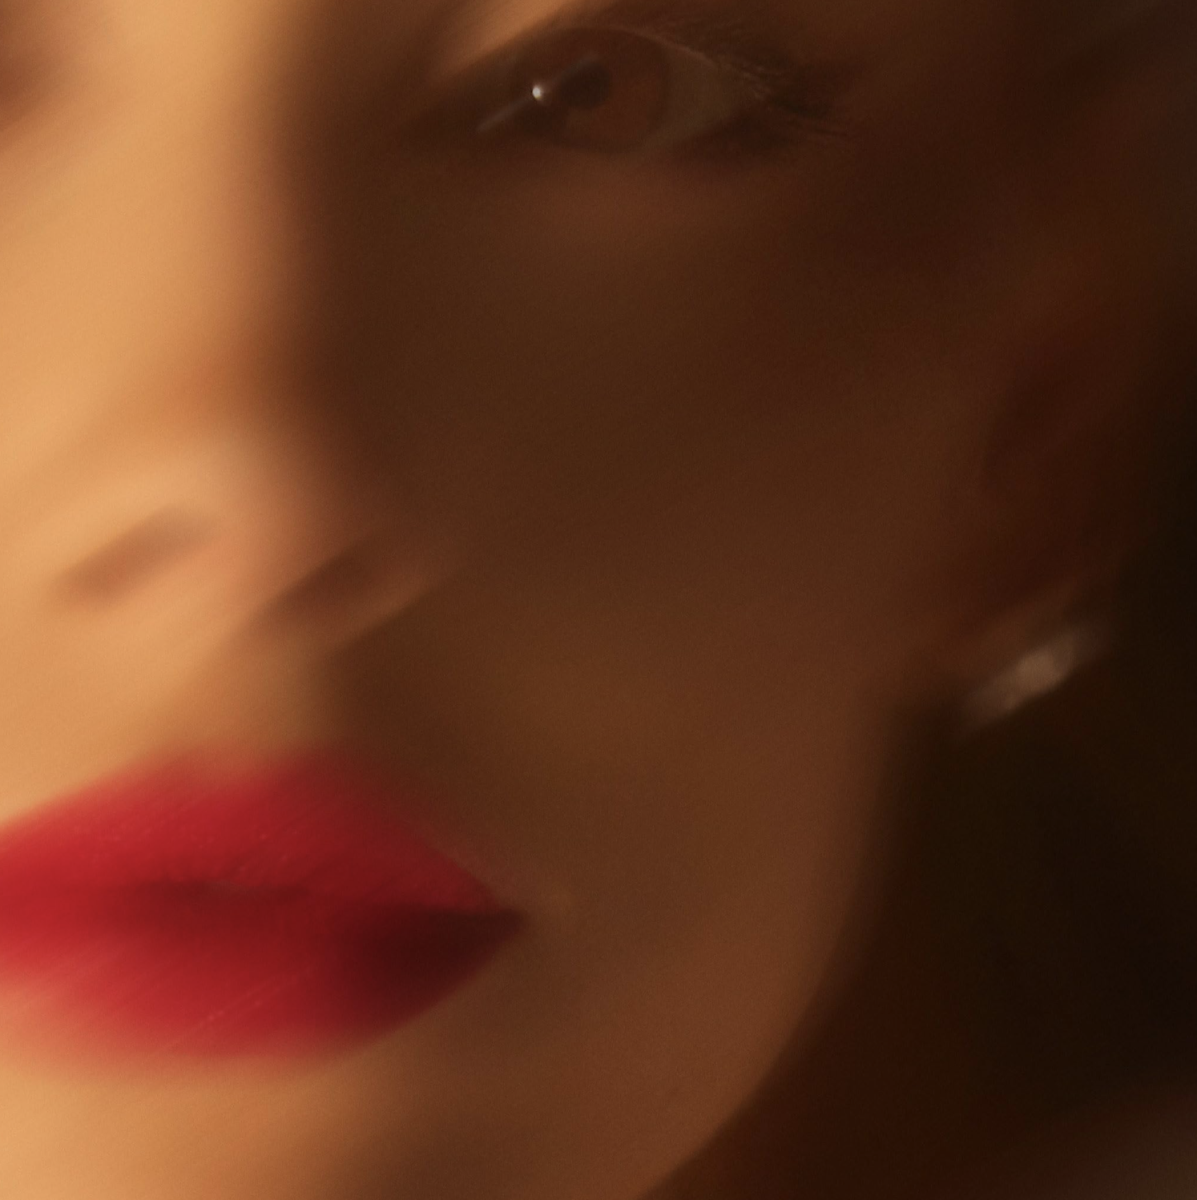 Ariana Grande poses up close to the camera in a blurry snapshot used as her new single’s cover.
Promotional material courtesy of Imbd